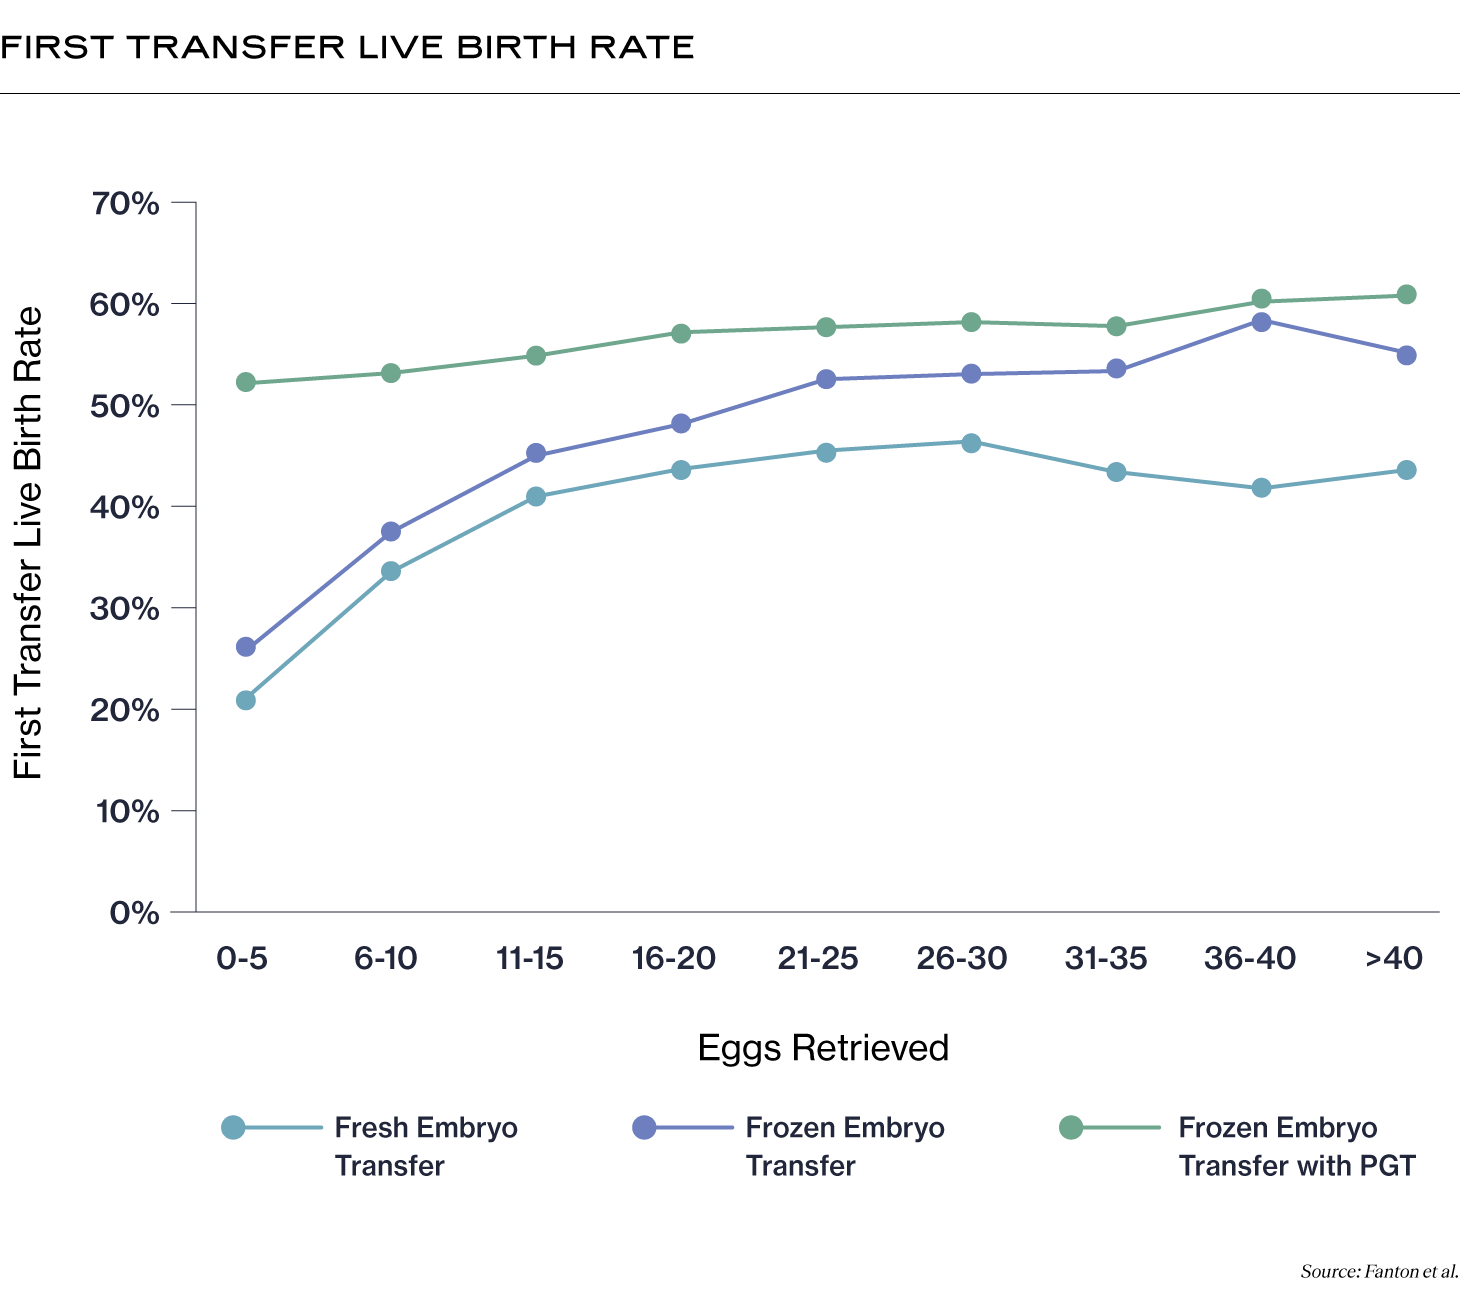 First Transfer Live Birth Rate